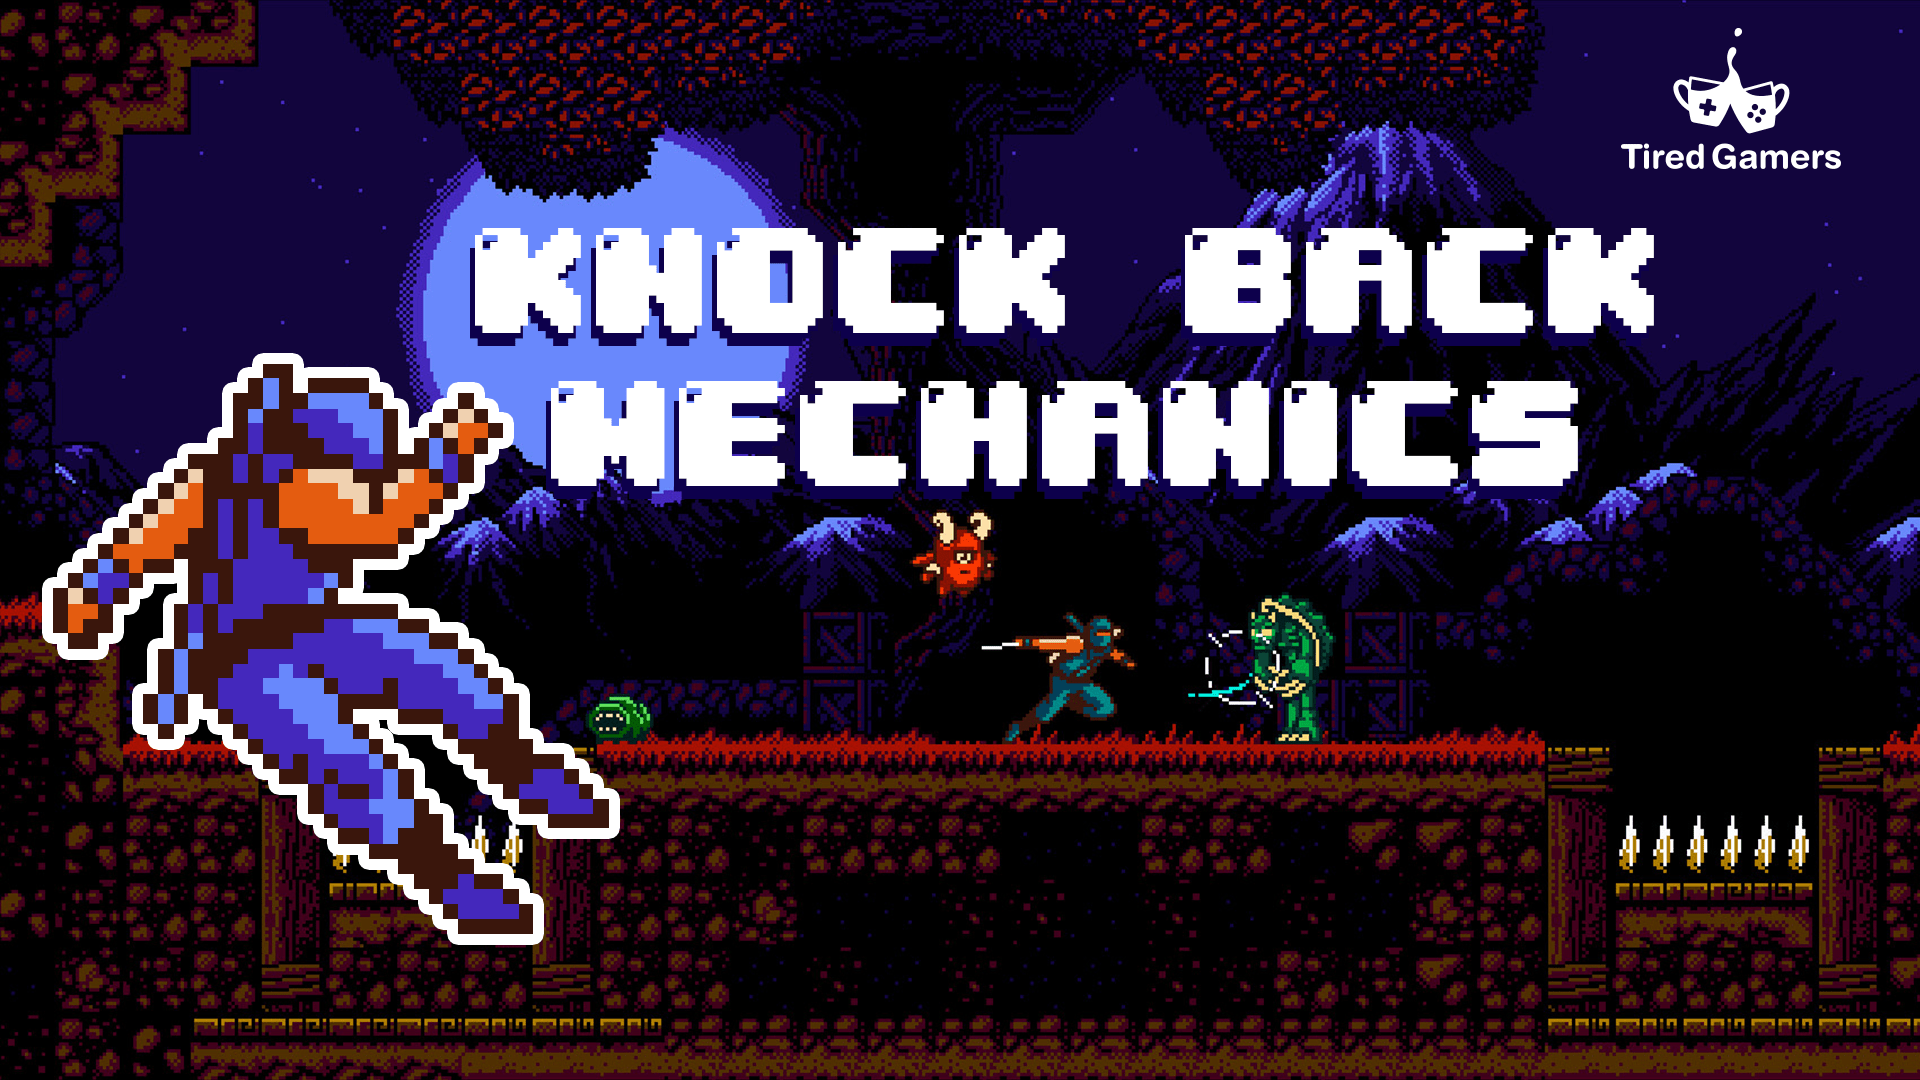 Indie game news and knock back mechanics in The Messenger